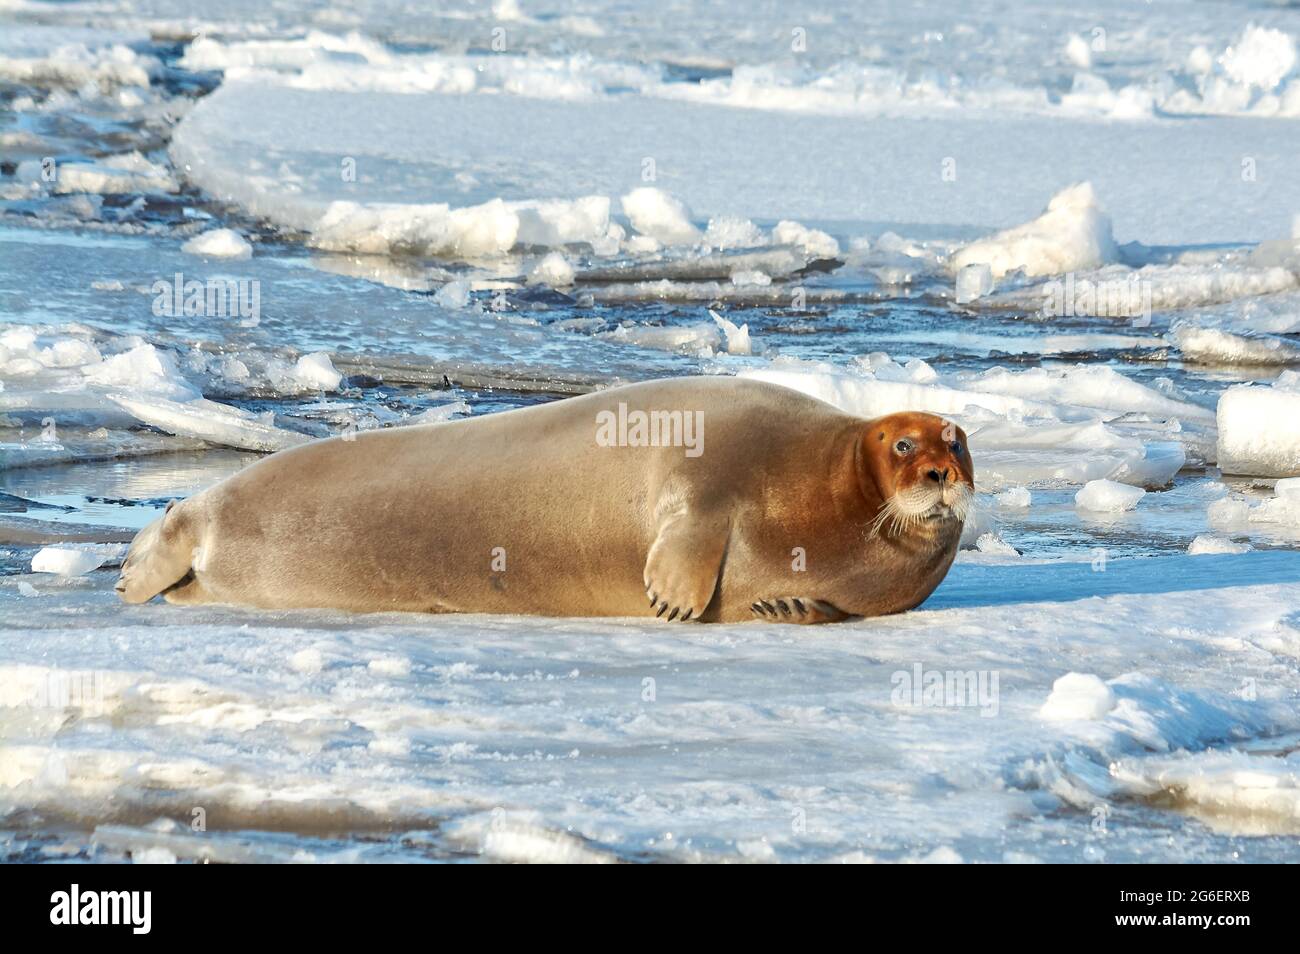 the seal is lying on the ice and resting basking in the sun Stock Photo